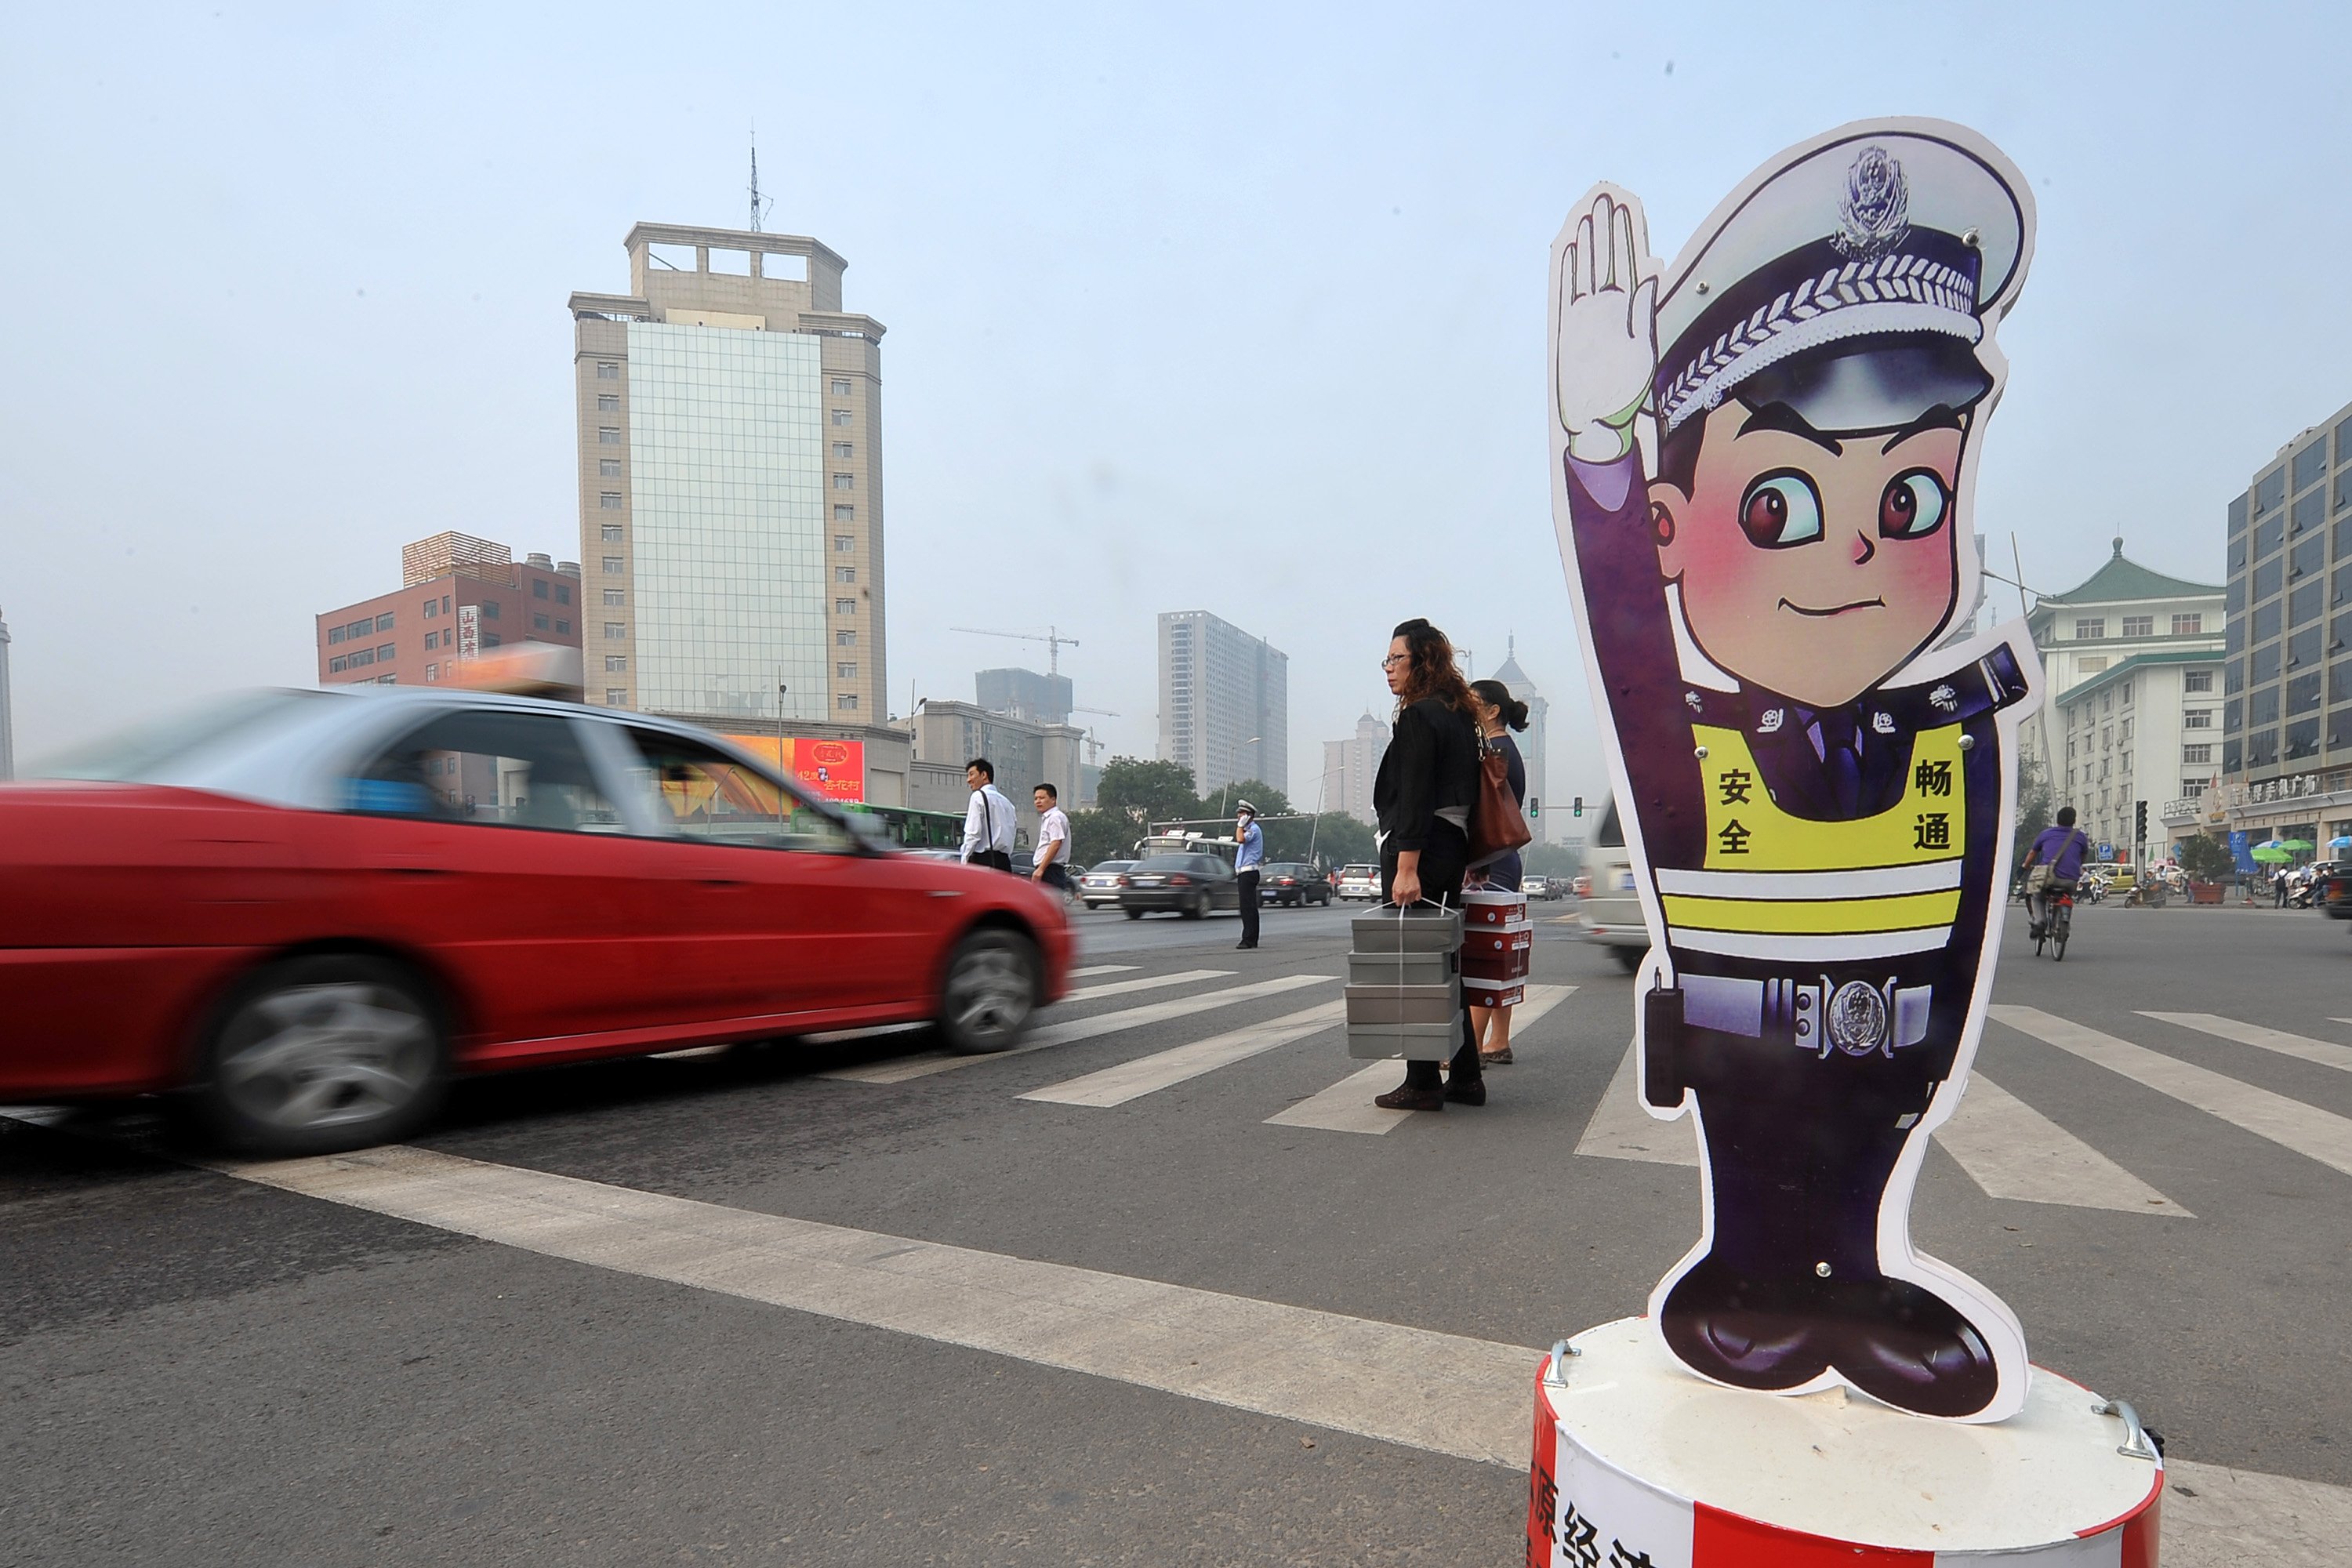 Beijing authorities have said that private car service apps are illegal and vowed to crackdown. Photo: Xinhua